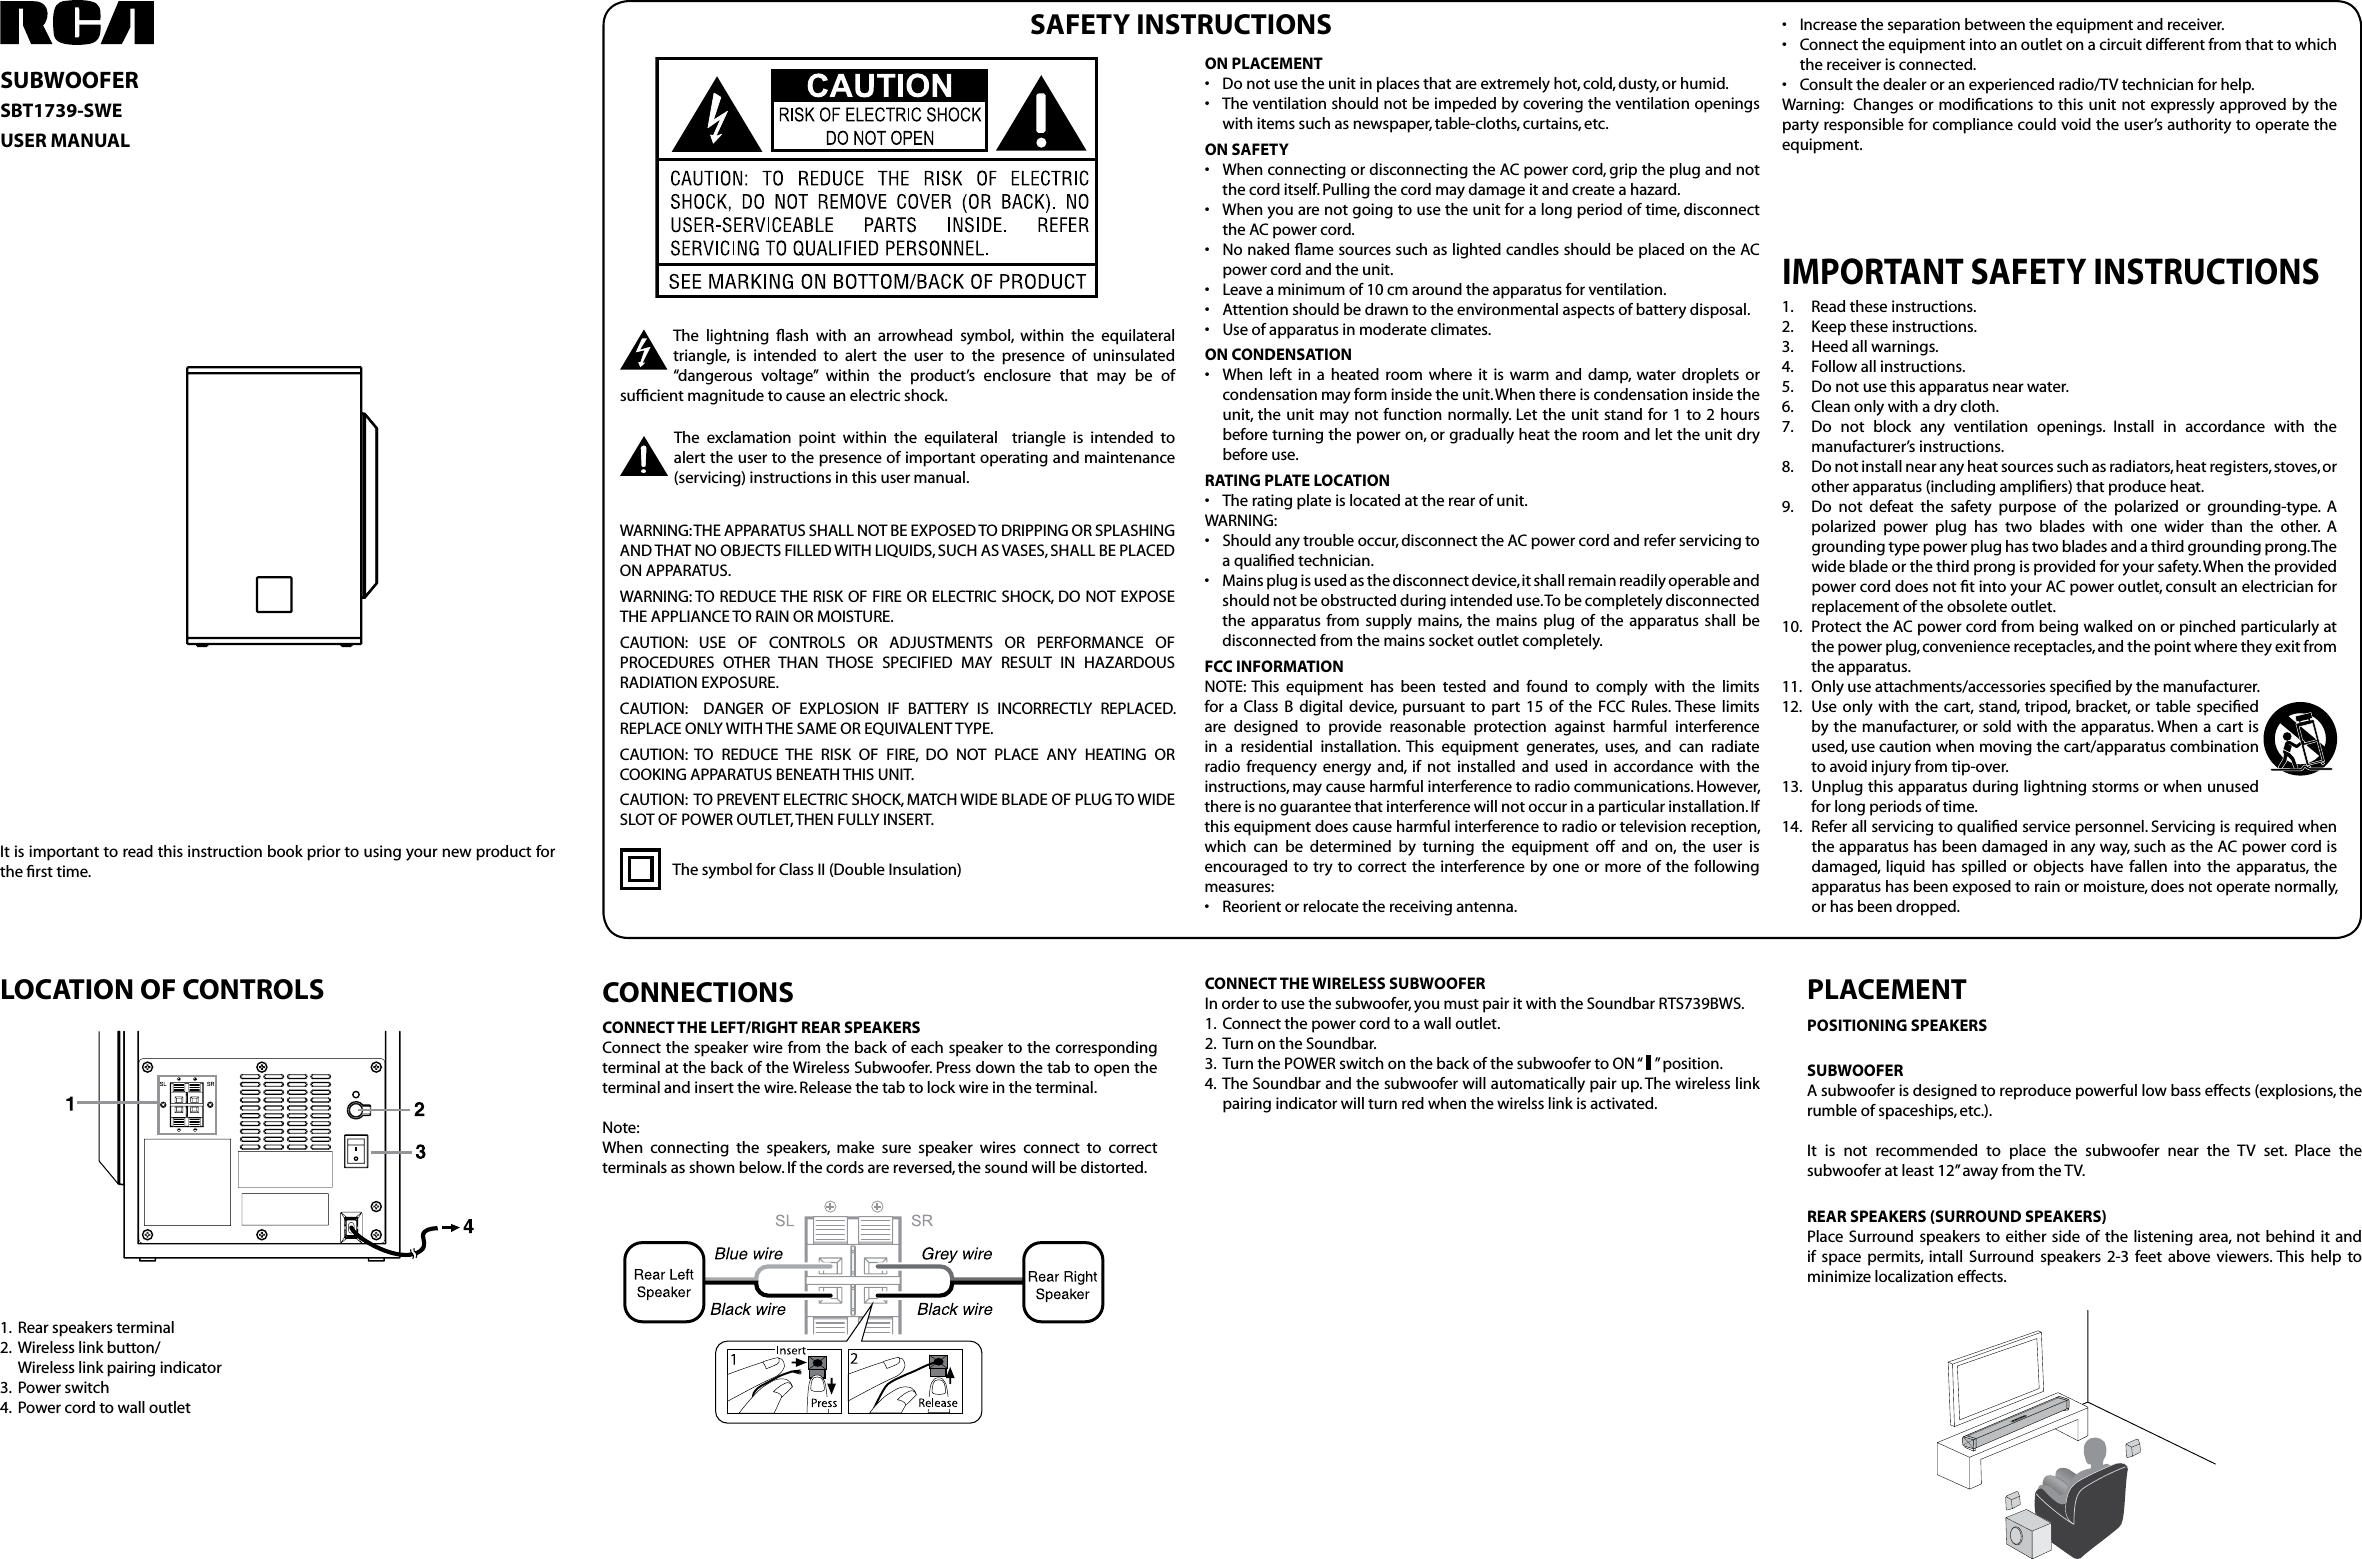 SUBWOOFERSBT1739-SWEUSER ManUalIt is important to read this instruction book prior to using your new product for the ﬁrst time.The lightning ﬂash with an arrowhead symbol, within the equilateral triangle, is intended to alert the user to the presence of uninsulated “dangerous voltage” within the product’s enclosure that may be of sufﬁcient magnitude to cause an electric shock.The symbol for Class II (Double Insulation)SaFETY InSTRUCTIOnSOn PlaCEMEnT• Donotusetheunitinplacesthatareextremelyhot,cold,dusty,orhumid.• Theventilationshouldnotbeimpededbycoveringtheventilationopeningswith items such as newspaper, table-cloths, curtains, etc.On SaFETY• WhenconnectingordisconnectingtheACpowercord,griptheplugandnotthe cord itself. Pulling the cord may damage it and create a hazard.• Whenyouarenotgoingtousetheunitforalongperiodoftime,disconnecttheACpowercord.• NonakedamesourcessuchaslightedcandlesshouldbeplacedontheACpower cord and the unit.• Leaveaminimumof10cmaroundtheapparatusforventilation.• Attentionshouldbedrawntotheenvironmentalaspectsofbatterydisposal.• Useofapparatusinmoderateclimates.On COndEnSaTIOn• When left in a heated room where it is warm and damp, water droplets orcondensationmayforminsidetheunit.Whenthereiscondensationinsidetheunit, theunit maynotfunctionnormally. Letthe unitstand for1to 2hoursbefore turning the power on, or gradually heat the room and let the unit dry before use.RaTIng PlaTE lOCaTIOn• Theratingplateislocatedattherearofunit.WARNING:• Shouldanytroubleoccur,disconnecttheACpowercordandreferservicingtoa qualiﬁed technician.• Mainsplugisusedasthedisconnectdevice,itshallremainreadilyoperableandshould not be obstructed during intended use. To be completely disconnected the apparatus from supply mains, the mains plug of the apparatus shall be disconnected from the mains socket outlet completely.FCC InFORMaTIOnNOTE: This equipment has been tested and found to comply with the limitsfor a Class B digital device, pursuant to part 15 of the FCC Rules. These limitsare designed to provide reasonable protection against harmful interference in a residential installation. This equipment generates, uses, and can radiate radio frequency energy and, if not installed and used in accordance with the instructions, may cause harmful interference to radio communications. However, there is no guarantee that interference will not occur in a particular installation. If this equipment does cause harmful interference to radio or television reception, which can be determined by turning the equipment off and on, the user is encouraged to try to correct the interference by one or more of the following measures:• Reorientorrelocatethereceivingantenna.WARNING:THEAPPARATUSSHALLNOTBEEXPOSEDTODRIPPINGORSPLASHINGANDTHATNOOBJECTSFILLEDWITHLIQUIDS,SUCHASVASES,SHALLBEPLACEDONAPPARATUS.WARNING:TOREDUCETHERISKOFFIREORELECTRICSHOCK,DONOTEXPOSETHEAPPLIANCETORAINORMOISTURE.CAUTION: USE OF CONTROLS OR ADJUSTMENTS OR PERFORMANCE OFPROCEDURES OTHER THAN THOSE SPECIFIED MAY RESULT IN HAZARDOUSRADIATIONEXPOSURE.CAUTION:  DANGER OF EXPLOSION IF BATTERY IS INCORRECTLY REPLACED.REPLACEONLYWITHTHESAMEOREQUIVALENTTYPE.CAUTION: TO REDUCE THE RISK OF FIRE, DO NOT PLACE ANY HEATING ORCOOKINGAPPARATUSBENEATHTHISUNIT.CAUTION:TOPREVENTELECTRICSHOCK,MATCHWIDEBLADEOFPLUGTOWIDESLOTOFPOWEROUTLET,THENFULLYINSERT.1. Readtheseinstructions.2. Keeptheseinstructions.3.  Heed all warnings.4. Followallinstructions.5. Donotusethisapparatusnearwater.6.  Clean only with a dry cloth.7.  Do not block any ventilation openings. Install in accordance with the manufacturer’s instructions.8.  Do not install near any heat sources such as radiators, heat registers, stoves, or other apparatus (including ampliﬁers) that produce heat. 9. Do not defeat the safety purpose of the polarized or grounding-type. Apolarized power plug has two blades with one wider than the other. Agrounding type power plug has two blades and a third grounding prong. The widebladeorthethirdprongisprovidedforyoursafety.WhentheprovidedpowercorddoesnottintoyourACpoweroutlet,consultanelectricianforreplacement of the obsolete outlet.10. ProtecttheACpowercordfrombeingwalkedonorpinchedparticularlyatthepowerplug,conveniencereceptacles,andthepointwheretheyexitfromthe apparatus.11. Onlyuseattachments/accessoriesspeciedbythemanufacturer.12. Use only with the cart, stand, tripod, bracket, or table speciedbythemanufacturer,orsold withtheapparatus.Whenacartisused,usecautionwhenmovingthecart/apparatuscombinationto avoid injury from tip-over.13. Unplugthisapparatusduringlightningstormsorwhenunusedfor long periods of time.14. Referallservicingtoqualiedservicepersonnel.Servicingisrequiredwhentheapparatushasbeendamagedinanyway,suchastheACpowercordisdamaged, liquid has spilled or objects have fallen into the apparatus, the apparatushasbeenexposedtorainormoisture,doesnotoperatenormally,or has been dropped.IMPORTanT SaFETY InSTRUCTIOnS1. Rearspeakersterminal2. Wirelesslinkbutton/ Wirelesslinkpairingindicator3.  Power switch4.  Power cord to wall outletlOCaTIOn OF COnTROlS PlaCEMEnTPOSITIOnIng SPEaKERSSUBWOOFERAsubwooferisdesignedtoreproducepowerfullowbasseffects(explosions,therumble of spaceships, etc.).It is not recommended to place the subwoofer near the TV set. Place thesubwooferatleast12”awayfromtheTV.REaR SPEaKERS (SURROUnd SPEaKERS)PlaceSurround speakers toeither sideof the listeningarea,not behindit andif space permits, intall Surround speakers 2-3 feet above viewers. This help tominimize localization effects.COnnECTIOnSCOnnECT THE lEFT/RIgHT REaR SPEaKERSConnect the speaker wire from the back of each speaker to the corresponding terminalatthebackoftheWirelessSubwoofer.Pressdownthetabtoopentheterminalandinsertthewire.Releasethetabtolockwireintheterminal.Note:When connecting the speakers, make sure speaker wires connect to correctterminals as shown below. If the cords are reversed, the sound will be distorted. COnnECT THE WIRElESS SUBWOOFERInordertousethesubwoofer,youmustpairitwiththeSoundbarRTS739BWS.1. Connectthepowercordtoawalloutlet.2. TurnontheSoundbar.3. TurnthePOWERswitchonthebackofthesubwoofertoON“  ” position.4. TheSoundbarandthesubwooferwillautomaticallypairup.Thewirelesslinkpairing indicator will turn red when the wirelss link is activated.The exclamation point within the equilateral  triangle is intended toalert the user to the presence of important operating and maintenance (servicing) instructions in this user manual.• Increasetheseparationbetweentheequipmentandreceiver.• Connecttheequipmentintoanoutletonacircuitdifferentfromthattowhichthe receiver is connected.• Consultthedealeroranexperiencedradio/TVtechnicianforhelp.Warning: Changesormodicationstothisunitnot expresslyapprovedbytheparty responsible for compliance could void the user’s authority to operate the equipment.